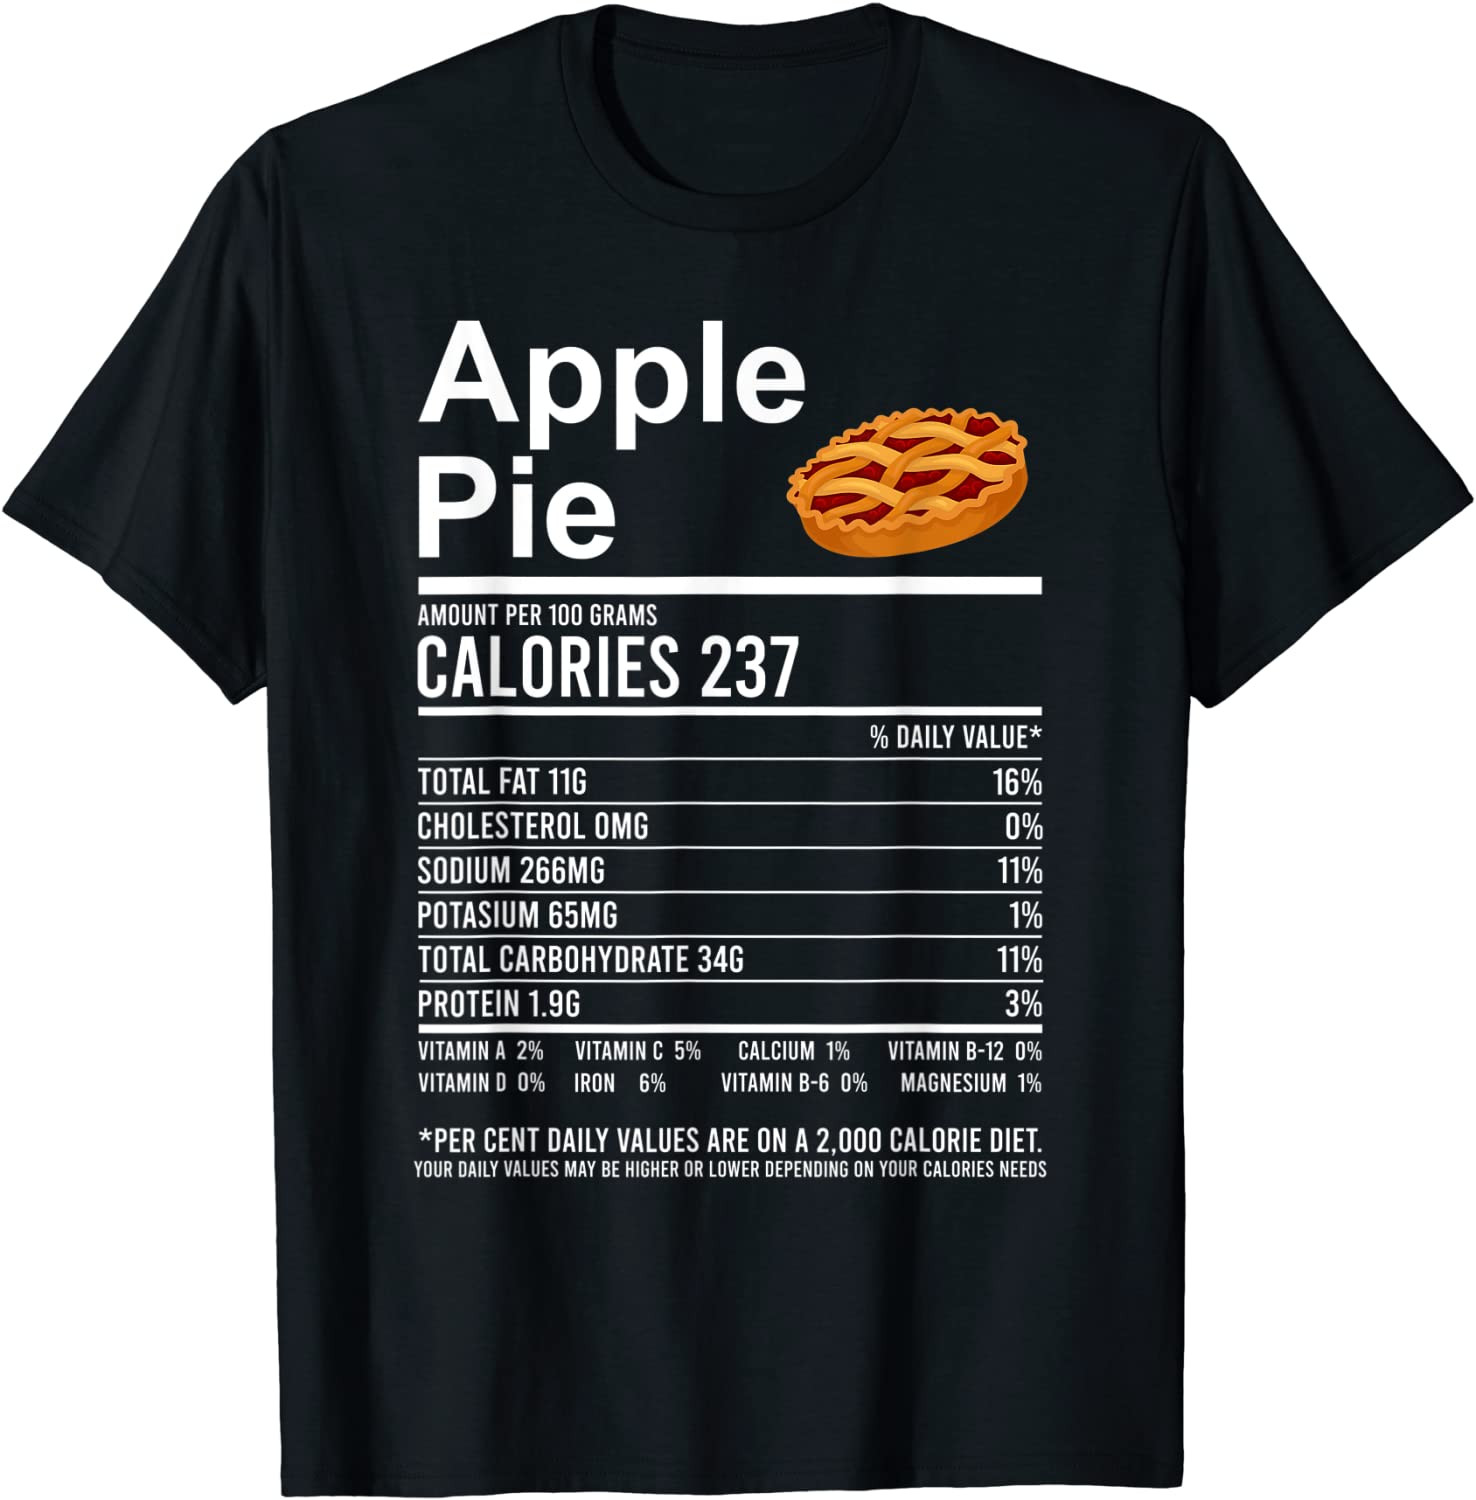 Funny Thanksgiving Food Apparel, Apple Pie Nutrition Facts T-Shirt